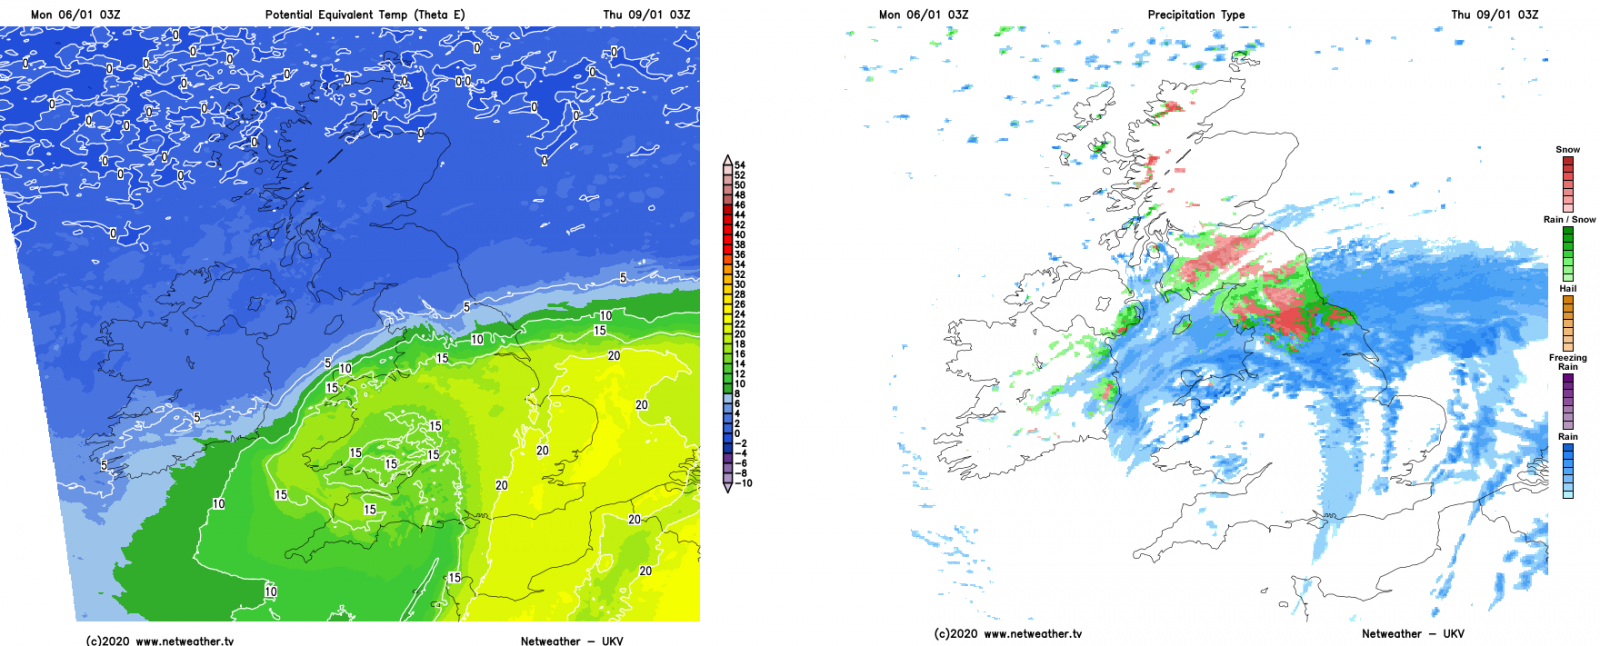 Temperature gradient north to south with the potential for snow over the hills of northern England